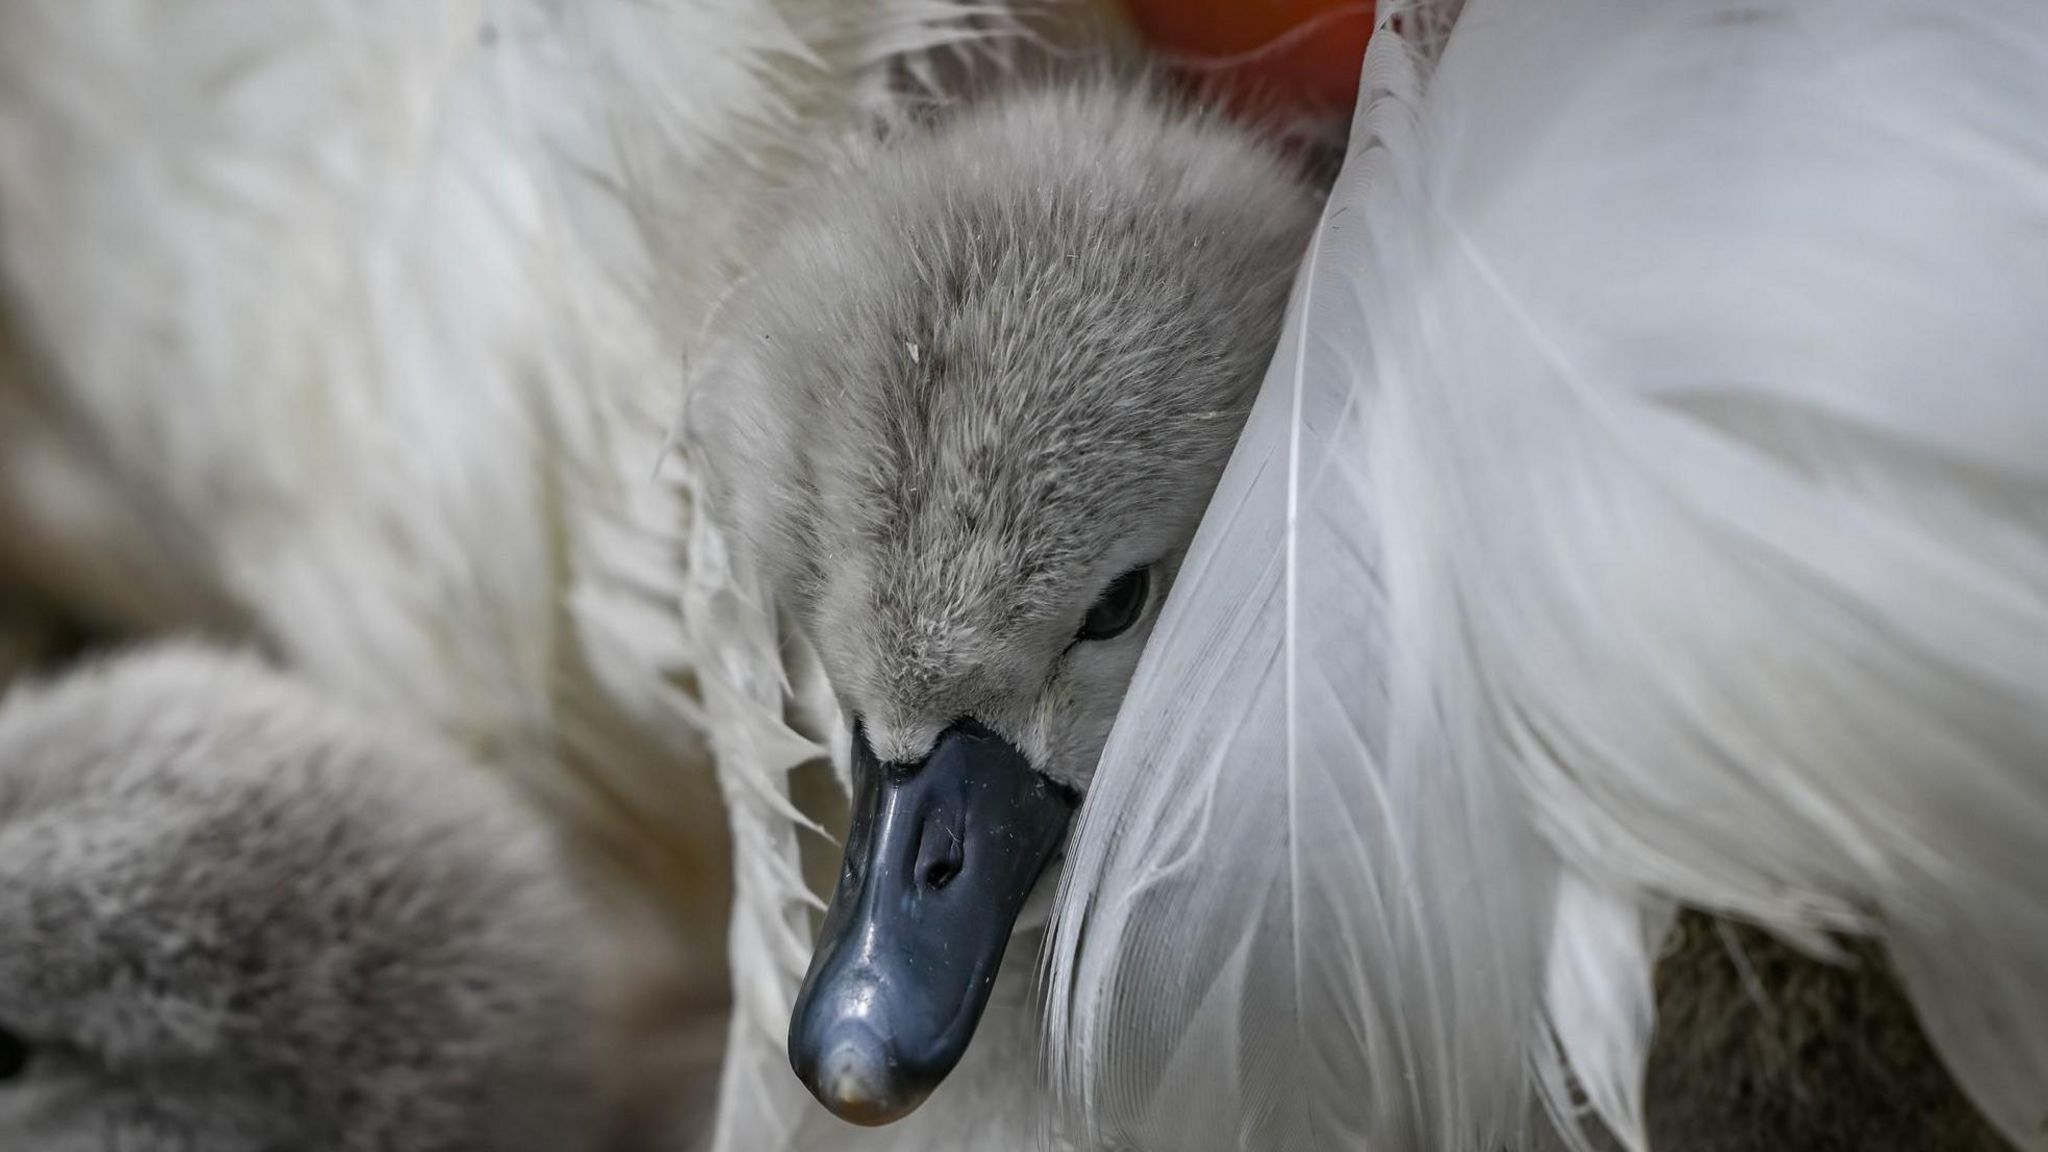 Cygnet nestling in feathers